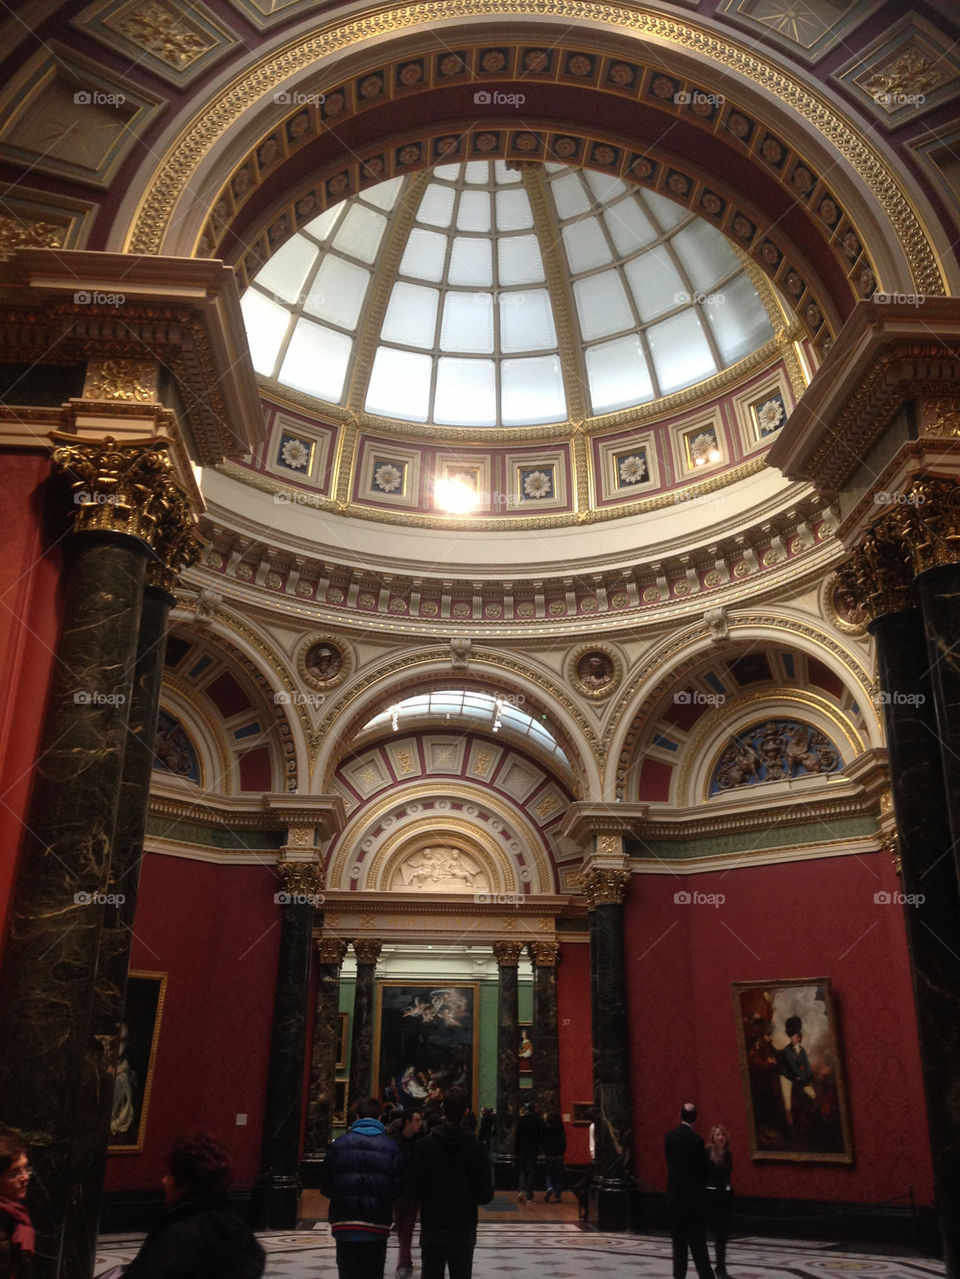 National portrait gallery